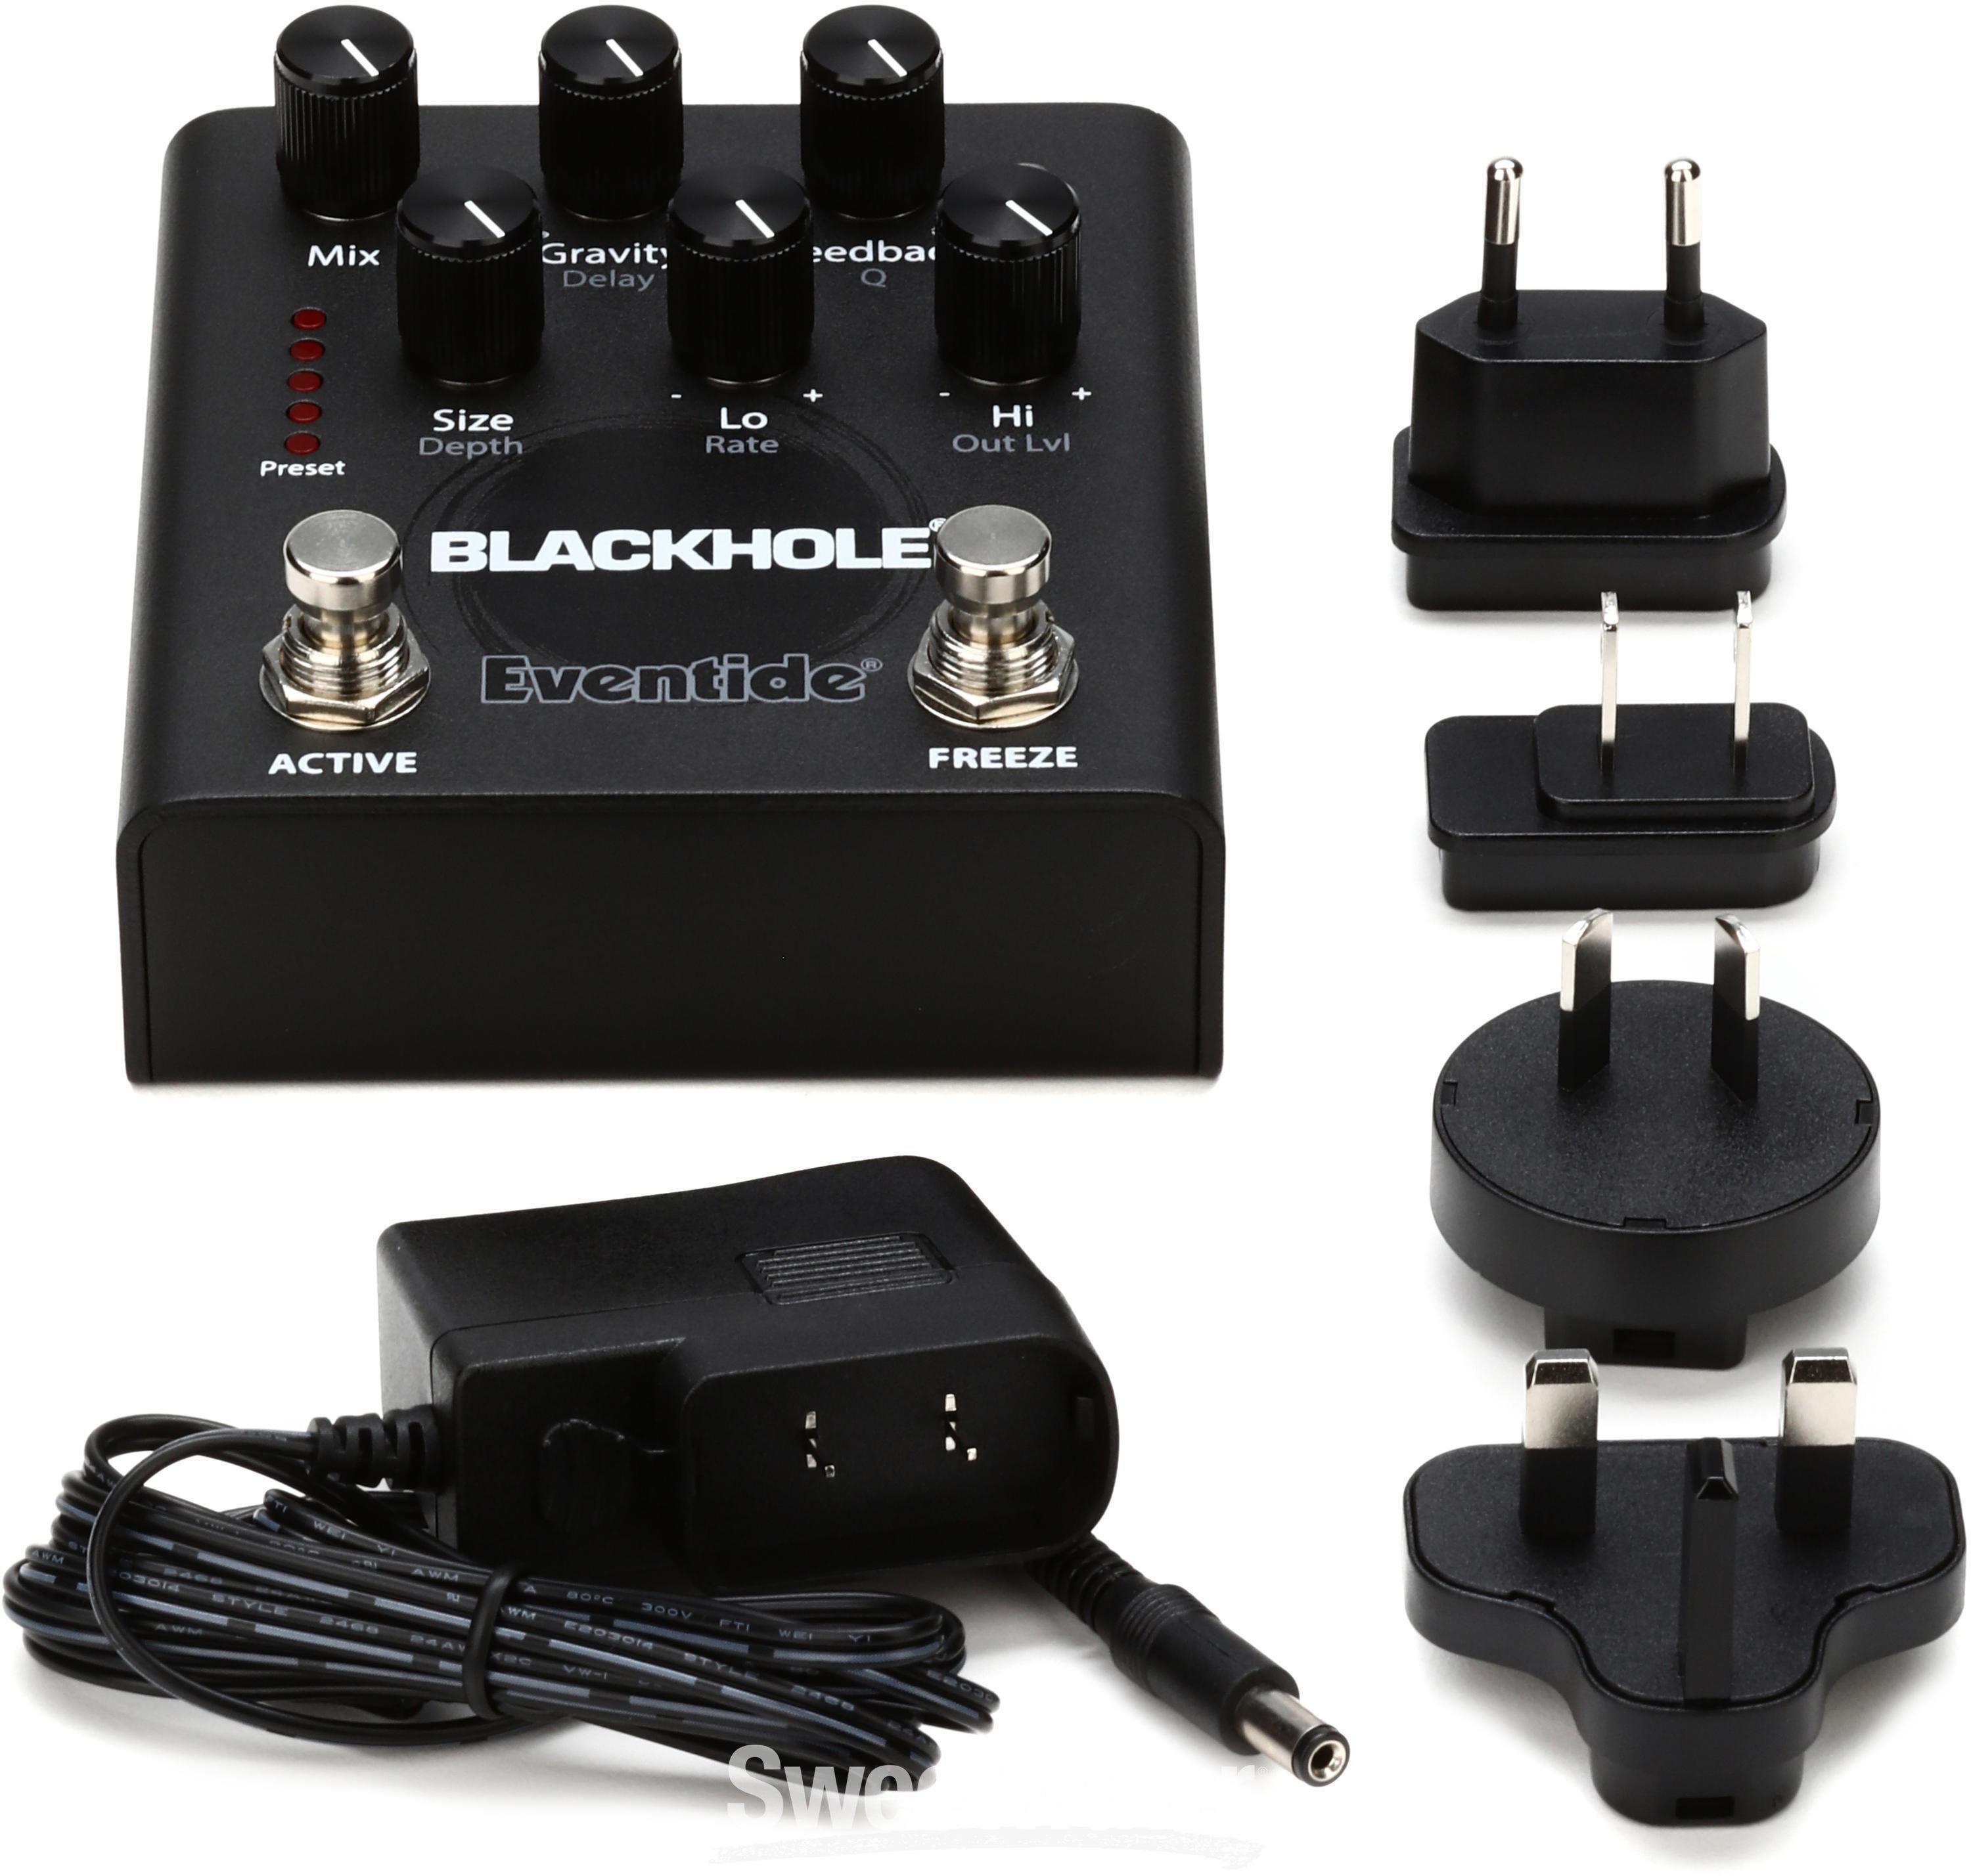 Eventide Blackhole Reverb Pedal | Sweetwater